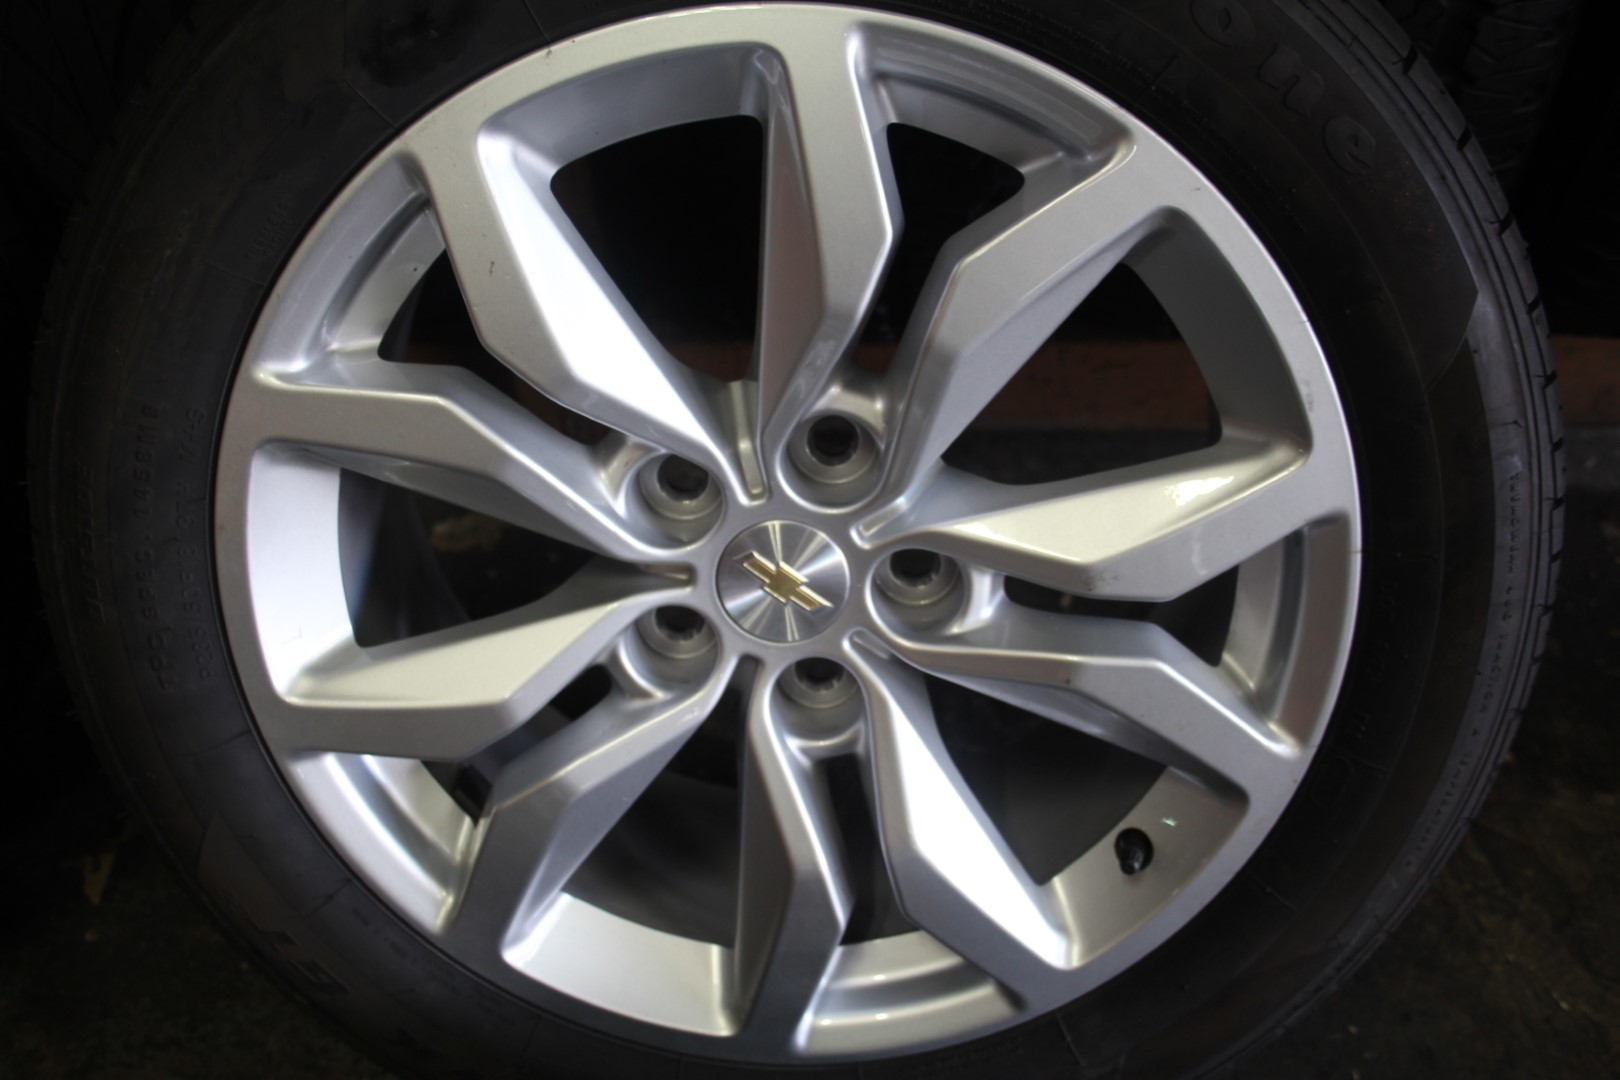 Set of 4 Chevrolet Impala 2015 2016 2017 2018 18" OEM 235/50/18 Rims Tires 0219 0119 What Size Tires Are On A 2017 Chevy Impala